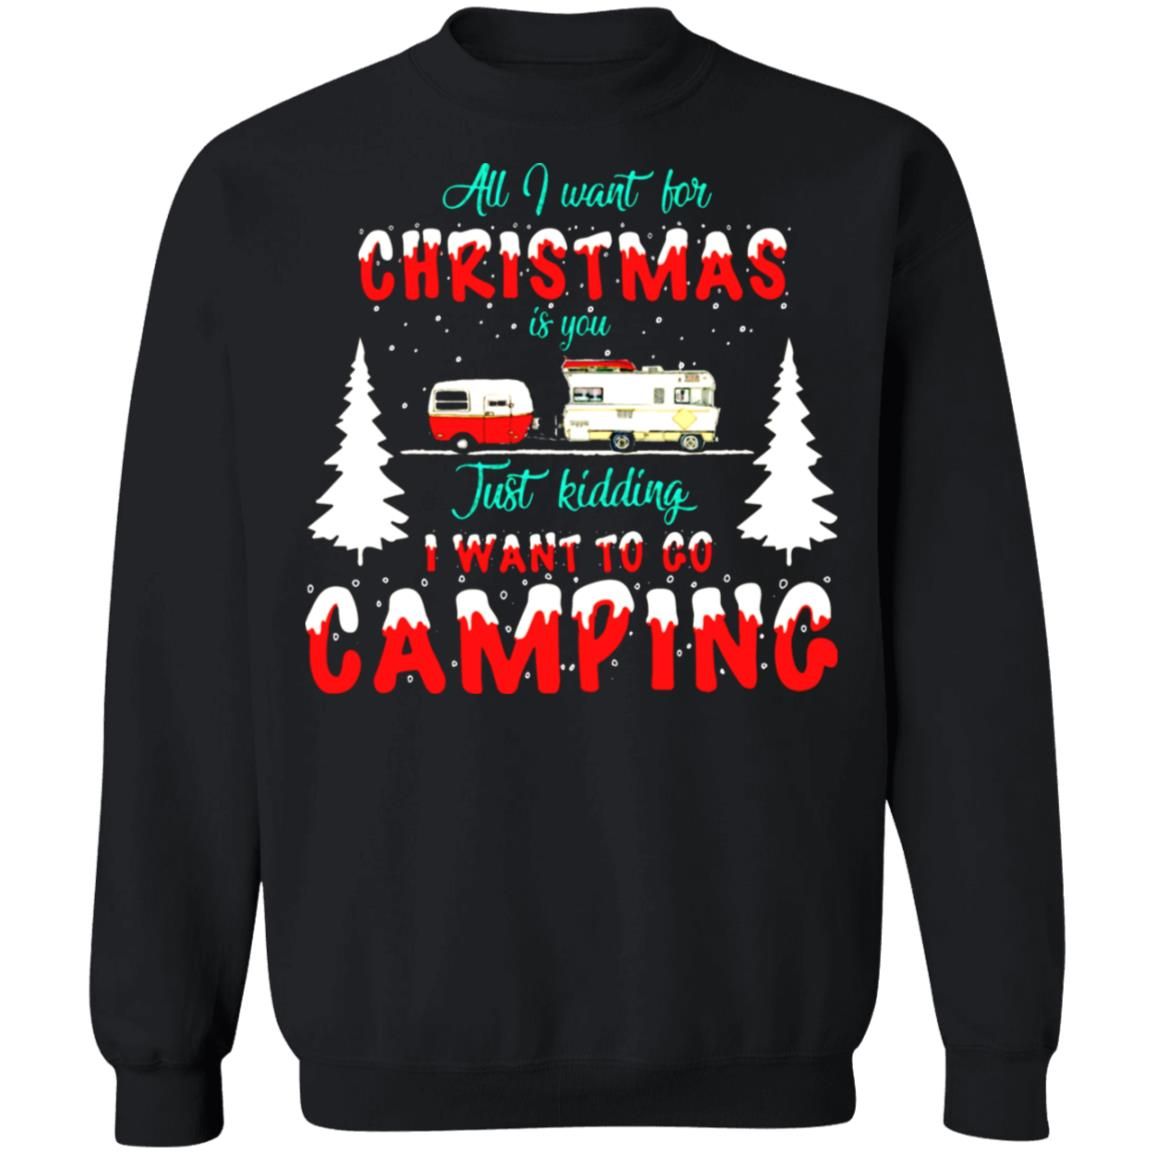 All I Want For Christmas Is You, Just Kidding I Want To Go Camping Christmas Sweatshirt Style: Sweatshirt, Color: Black